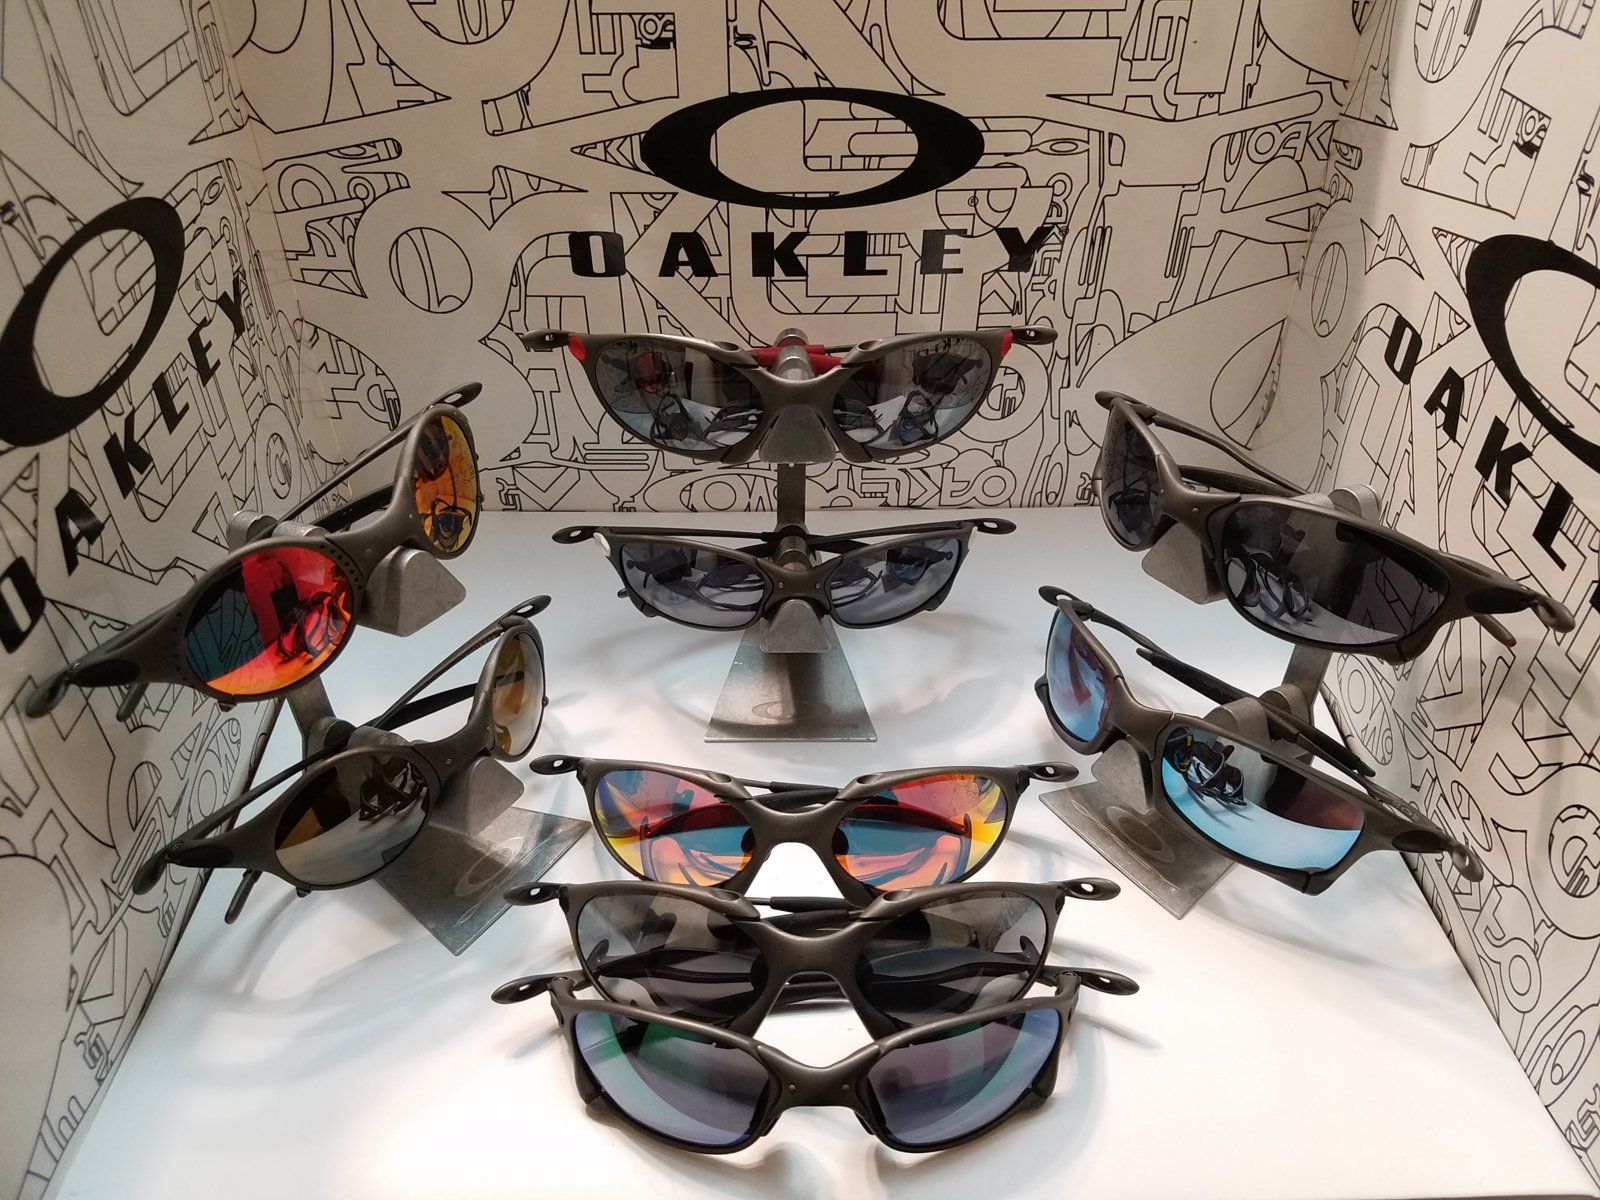 oakley x metal collection